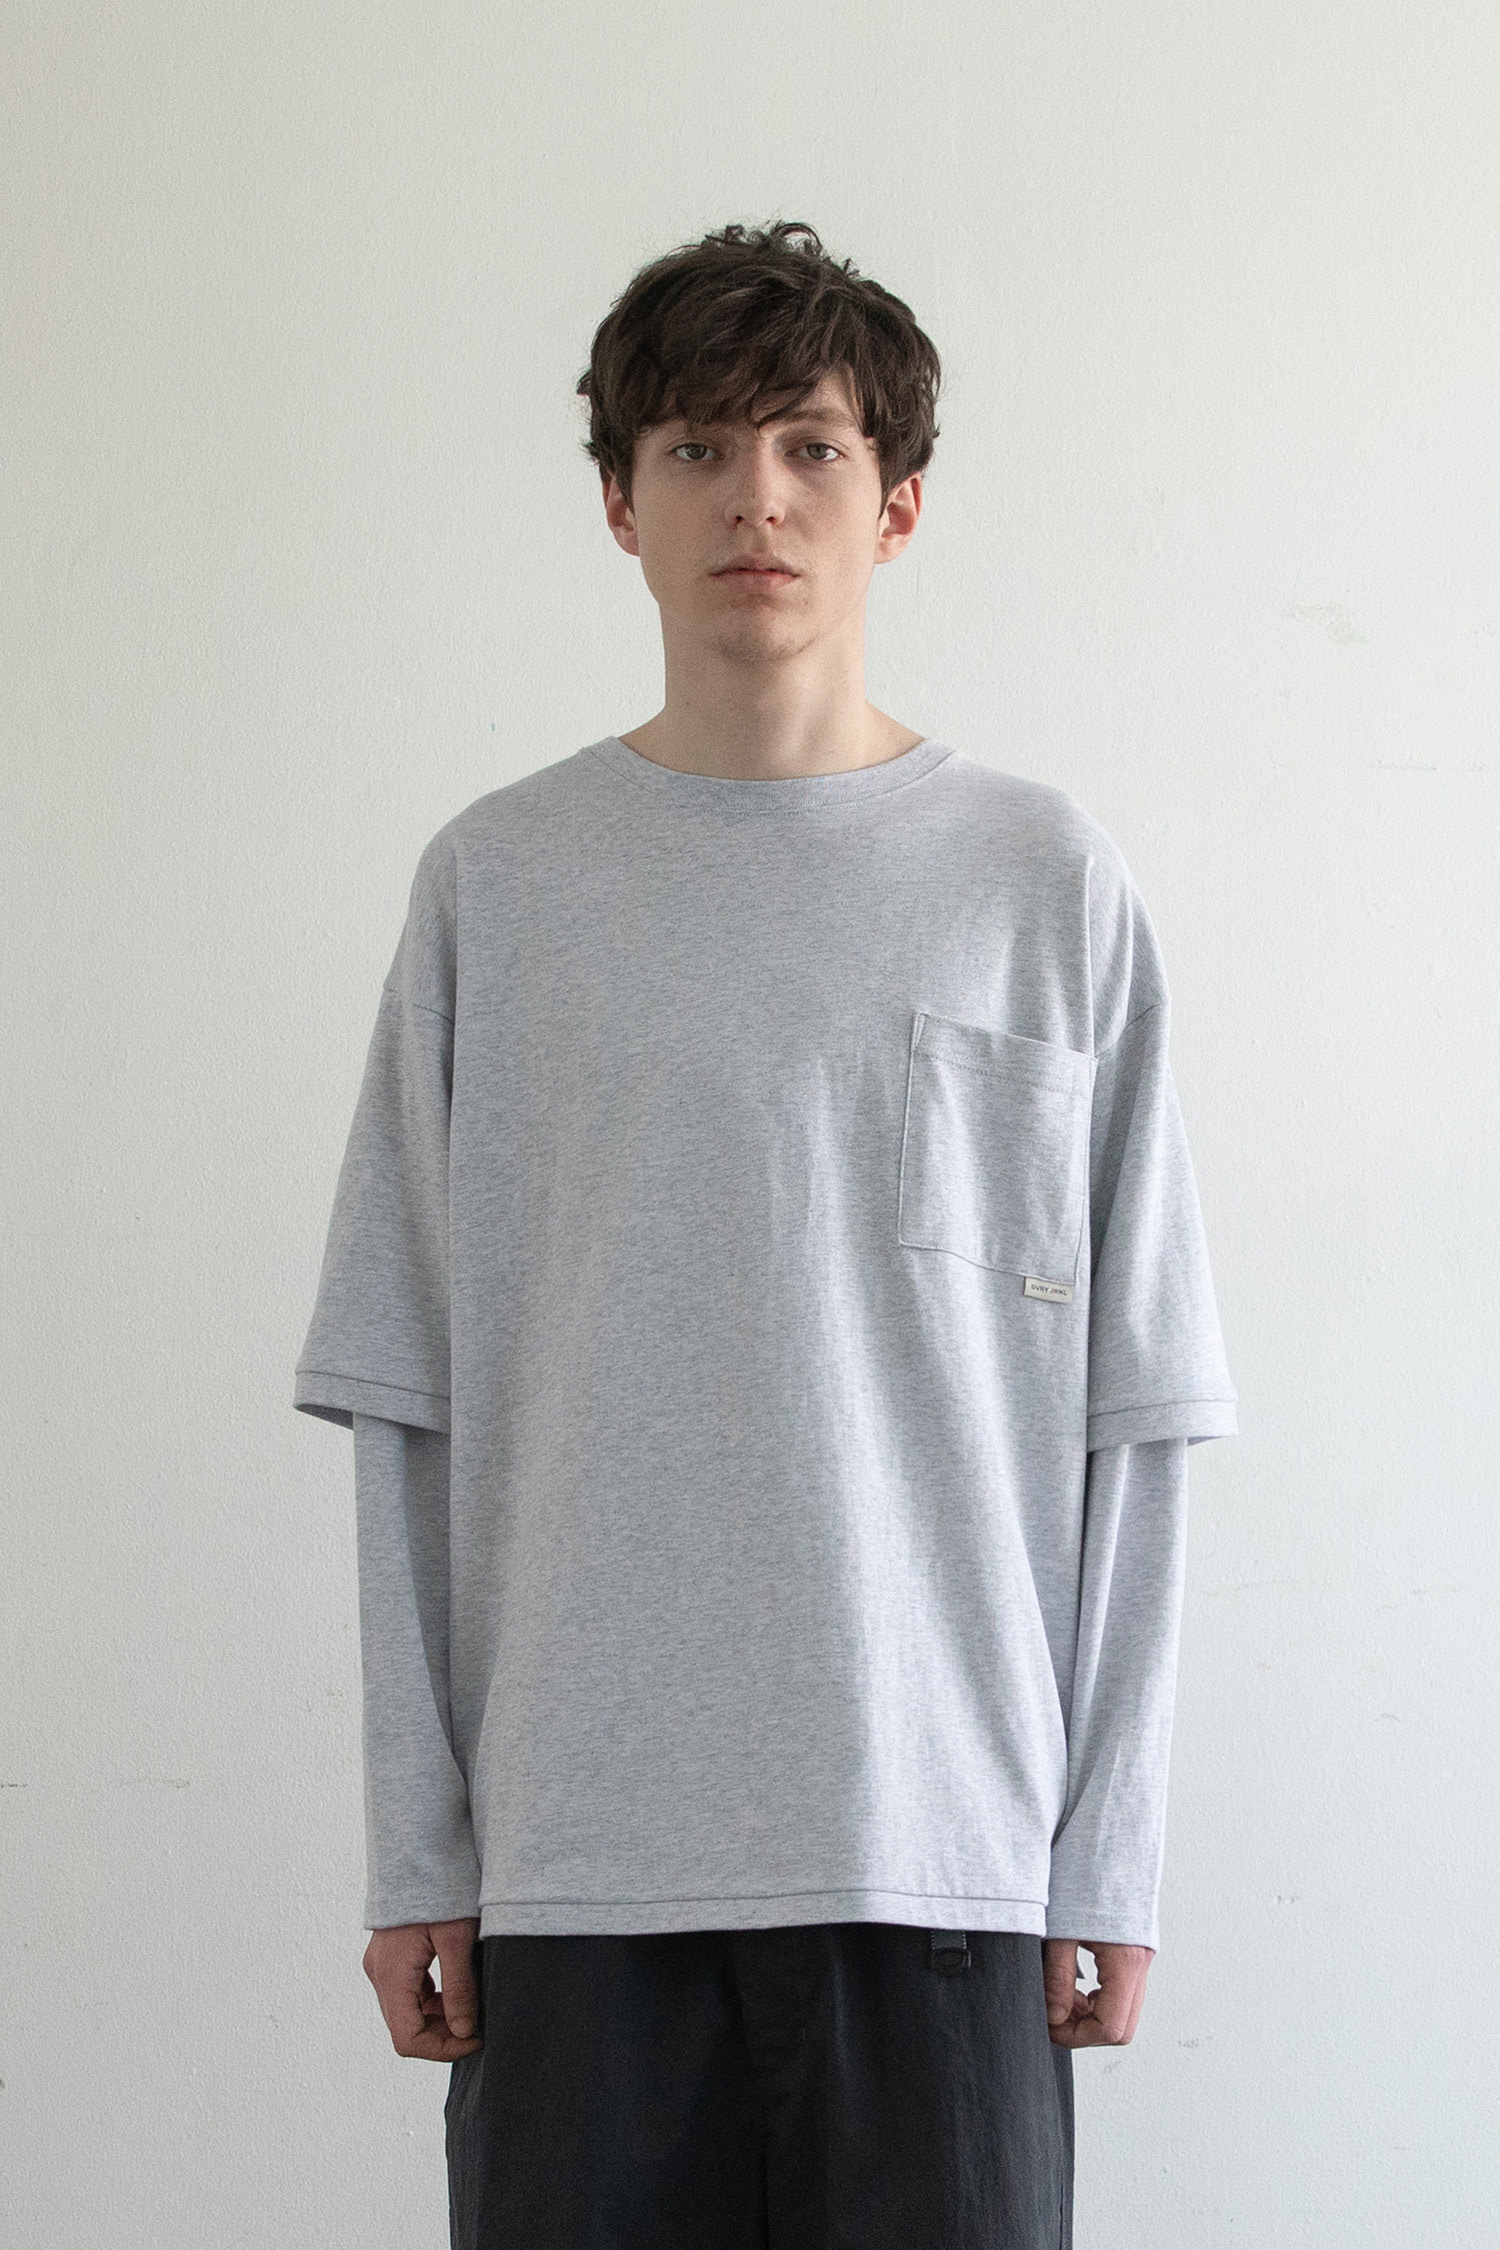 Sk8er Layered T (Heather Gray)